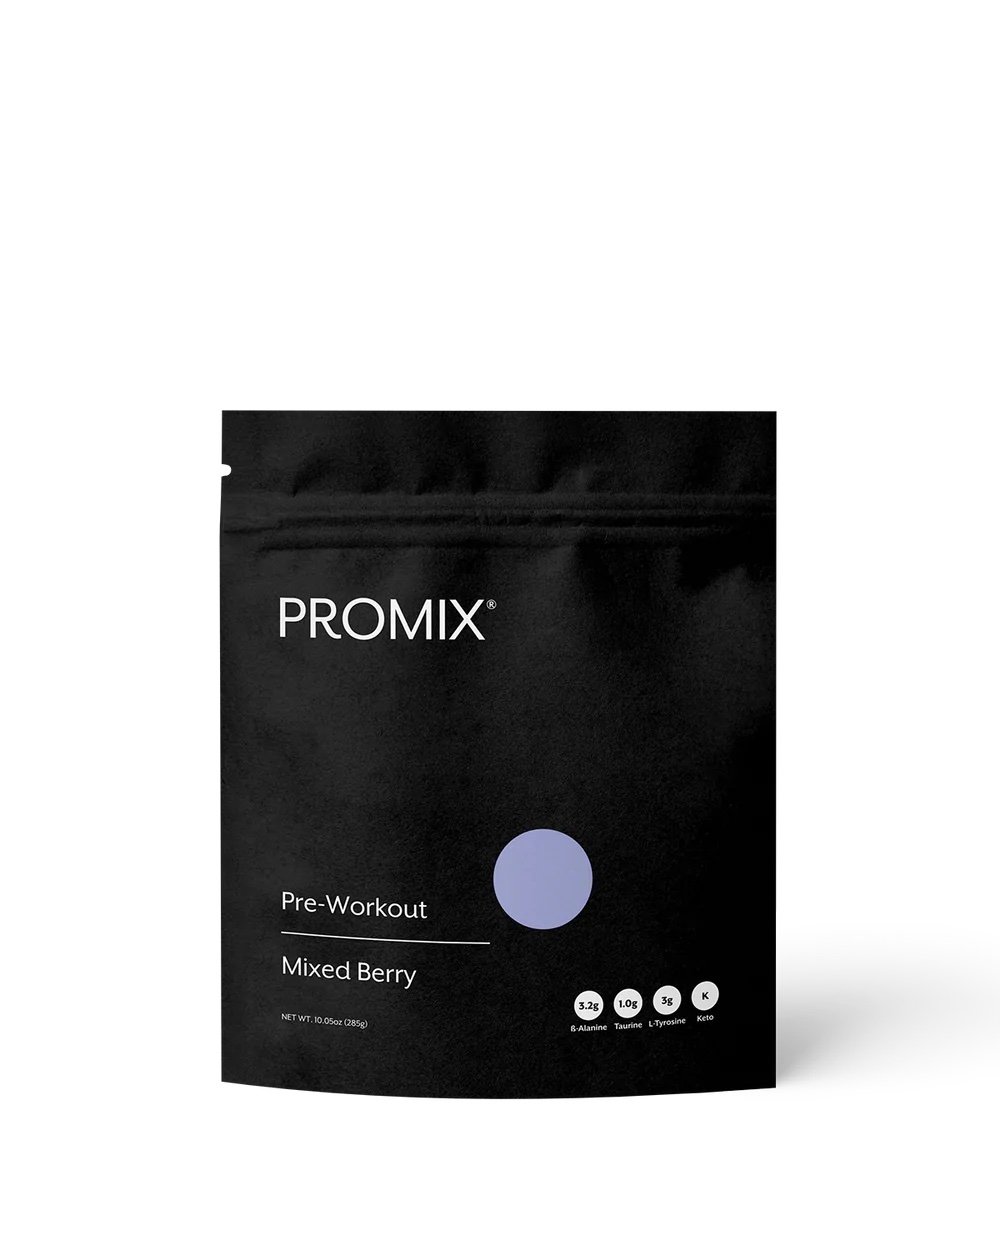 Promix Pre Workout — CUSTOM FIT Personal Training & Nutrition